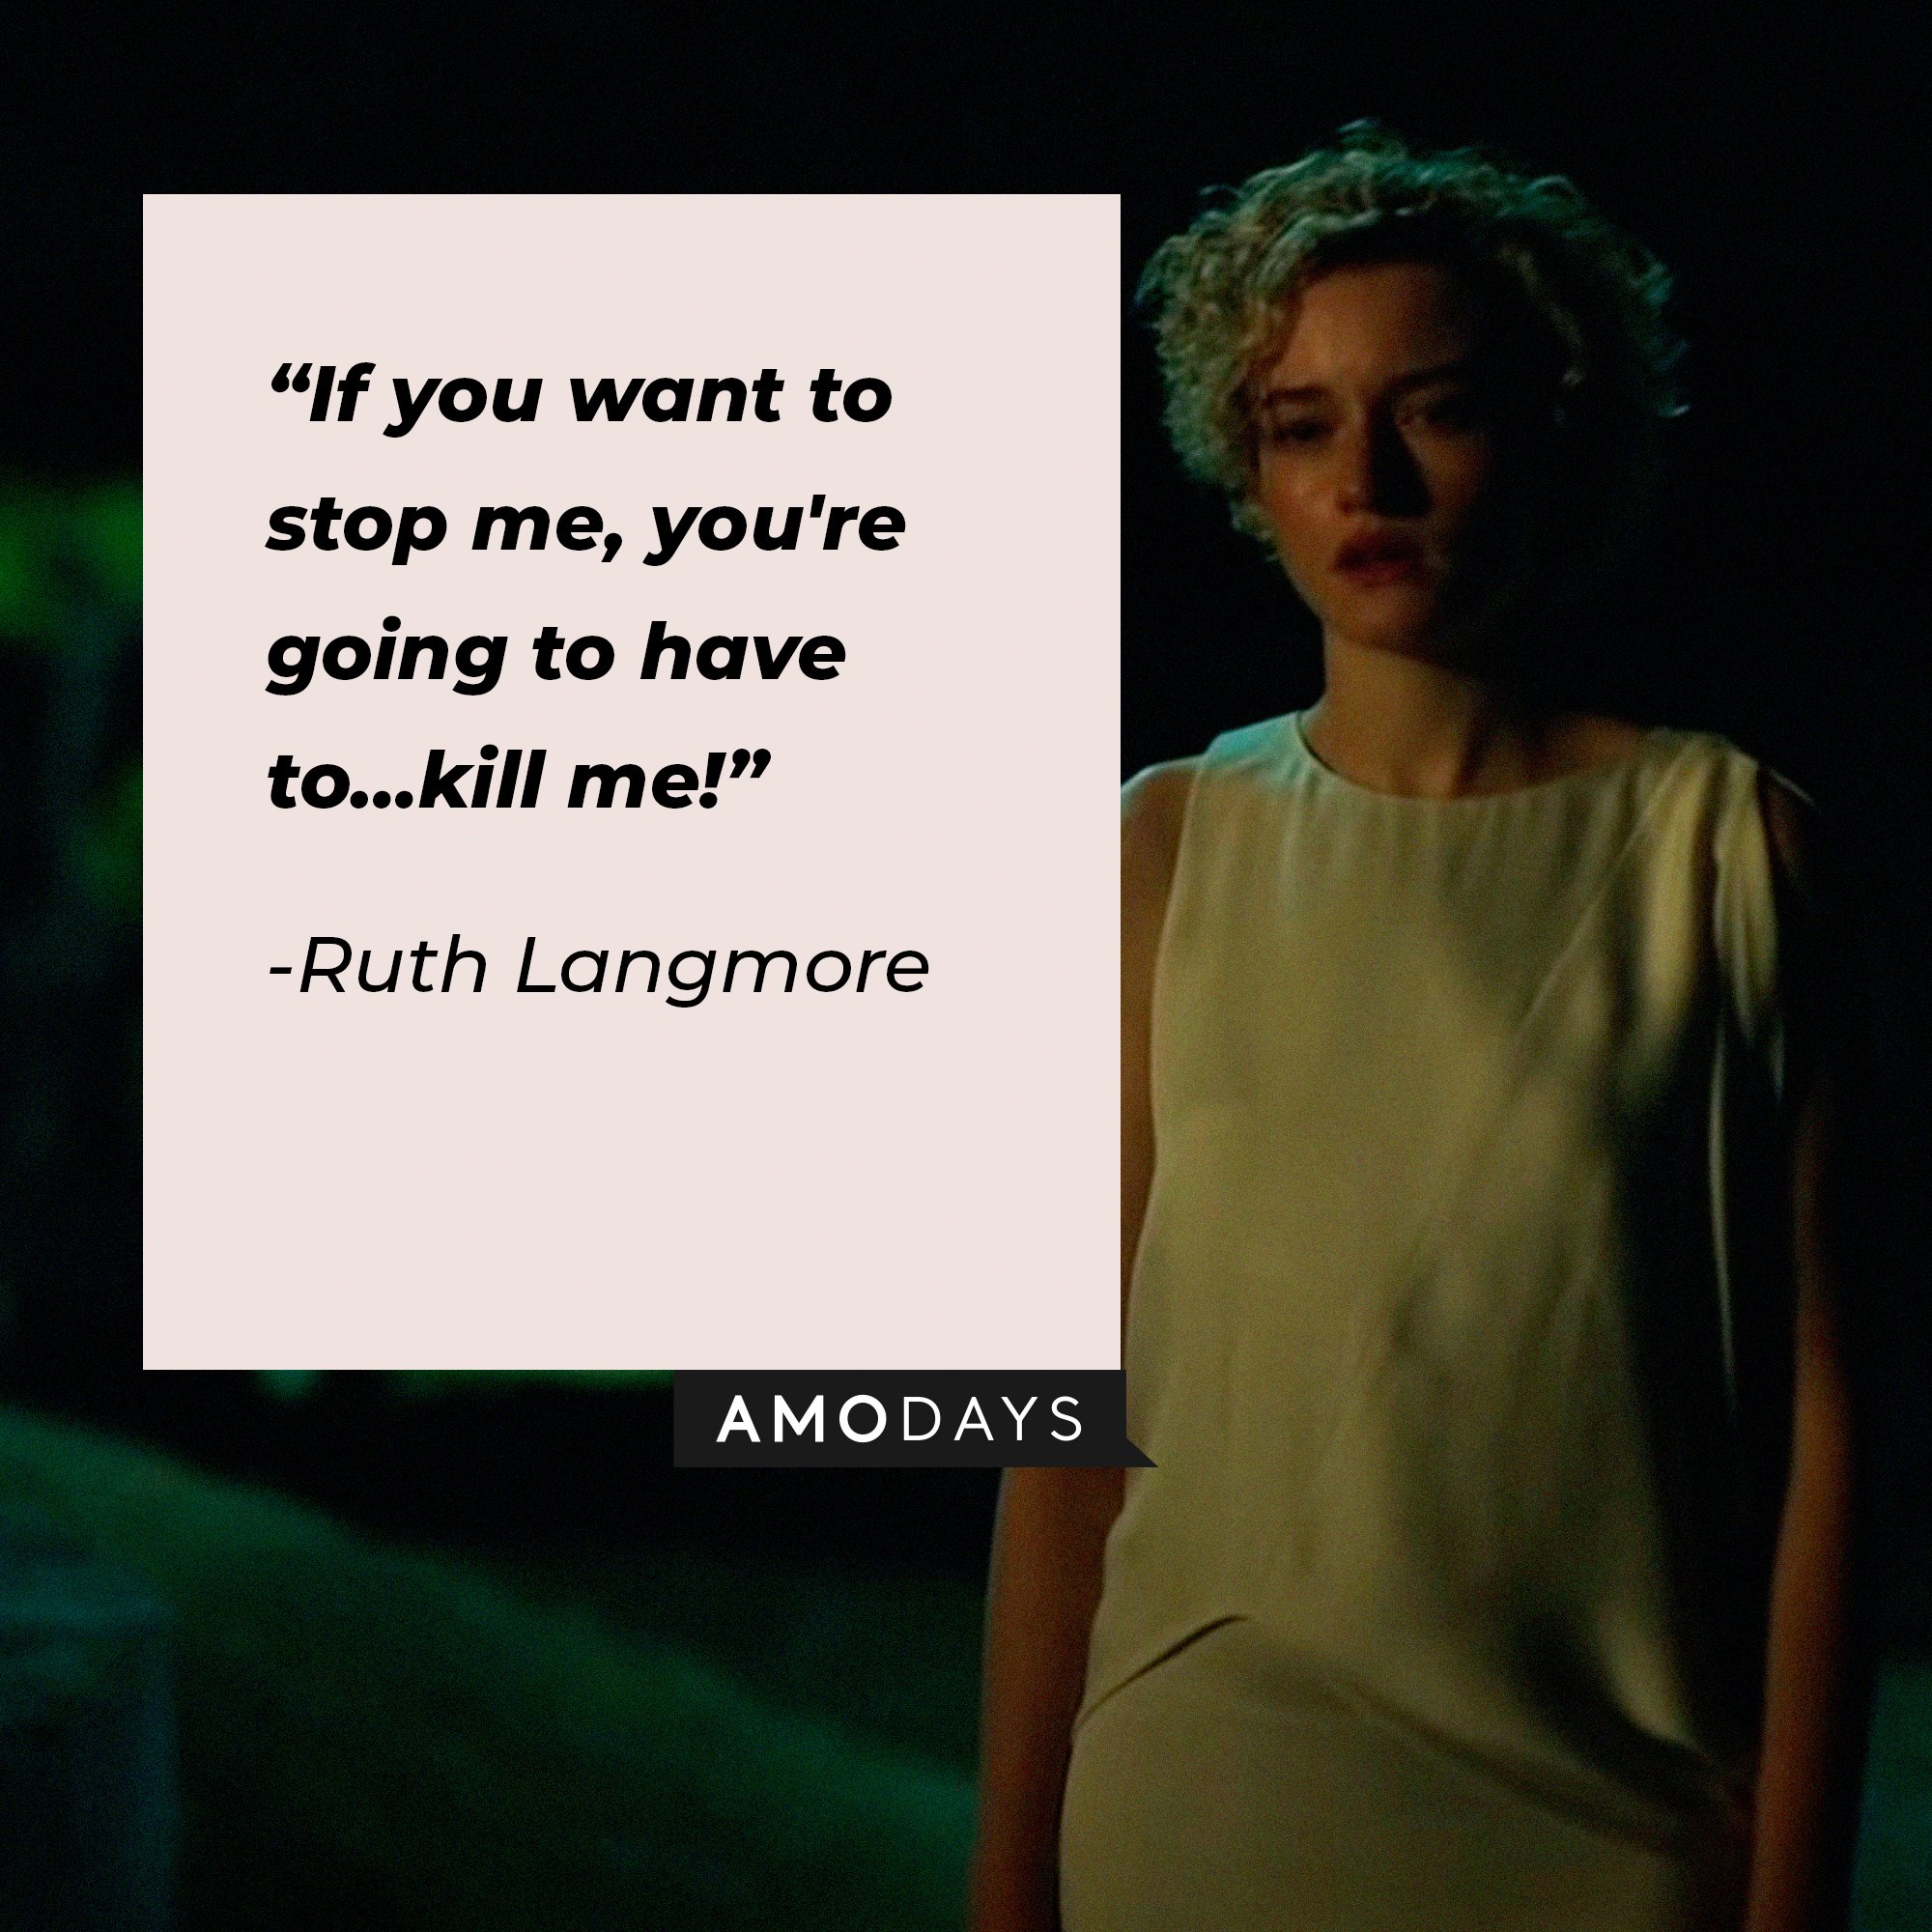 Ruth Langmore’s quote: “If you want to stop me, you're going to have to…kill me!” | Image: AmoDays